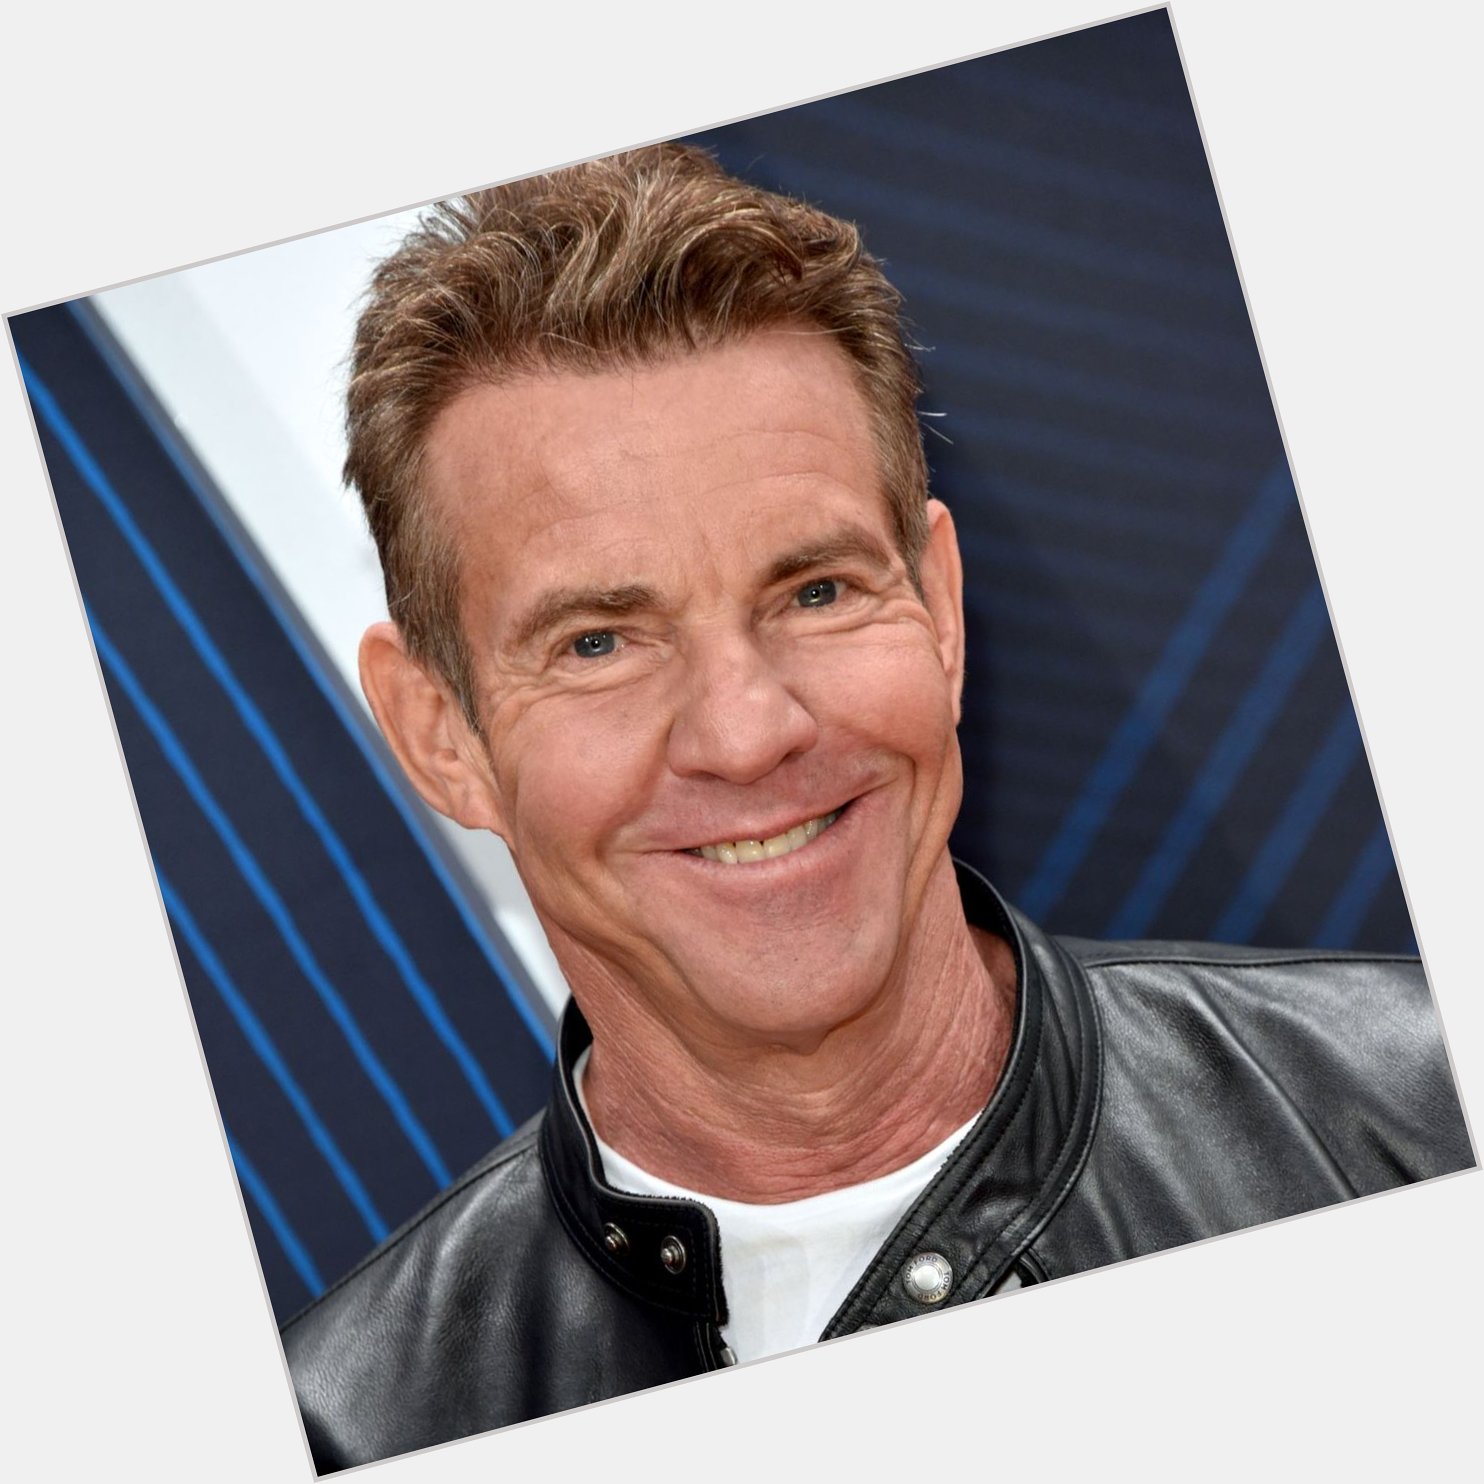 Happy Birthday Wishes going out to Dennis Quaid today! 